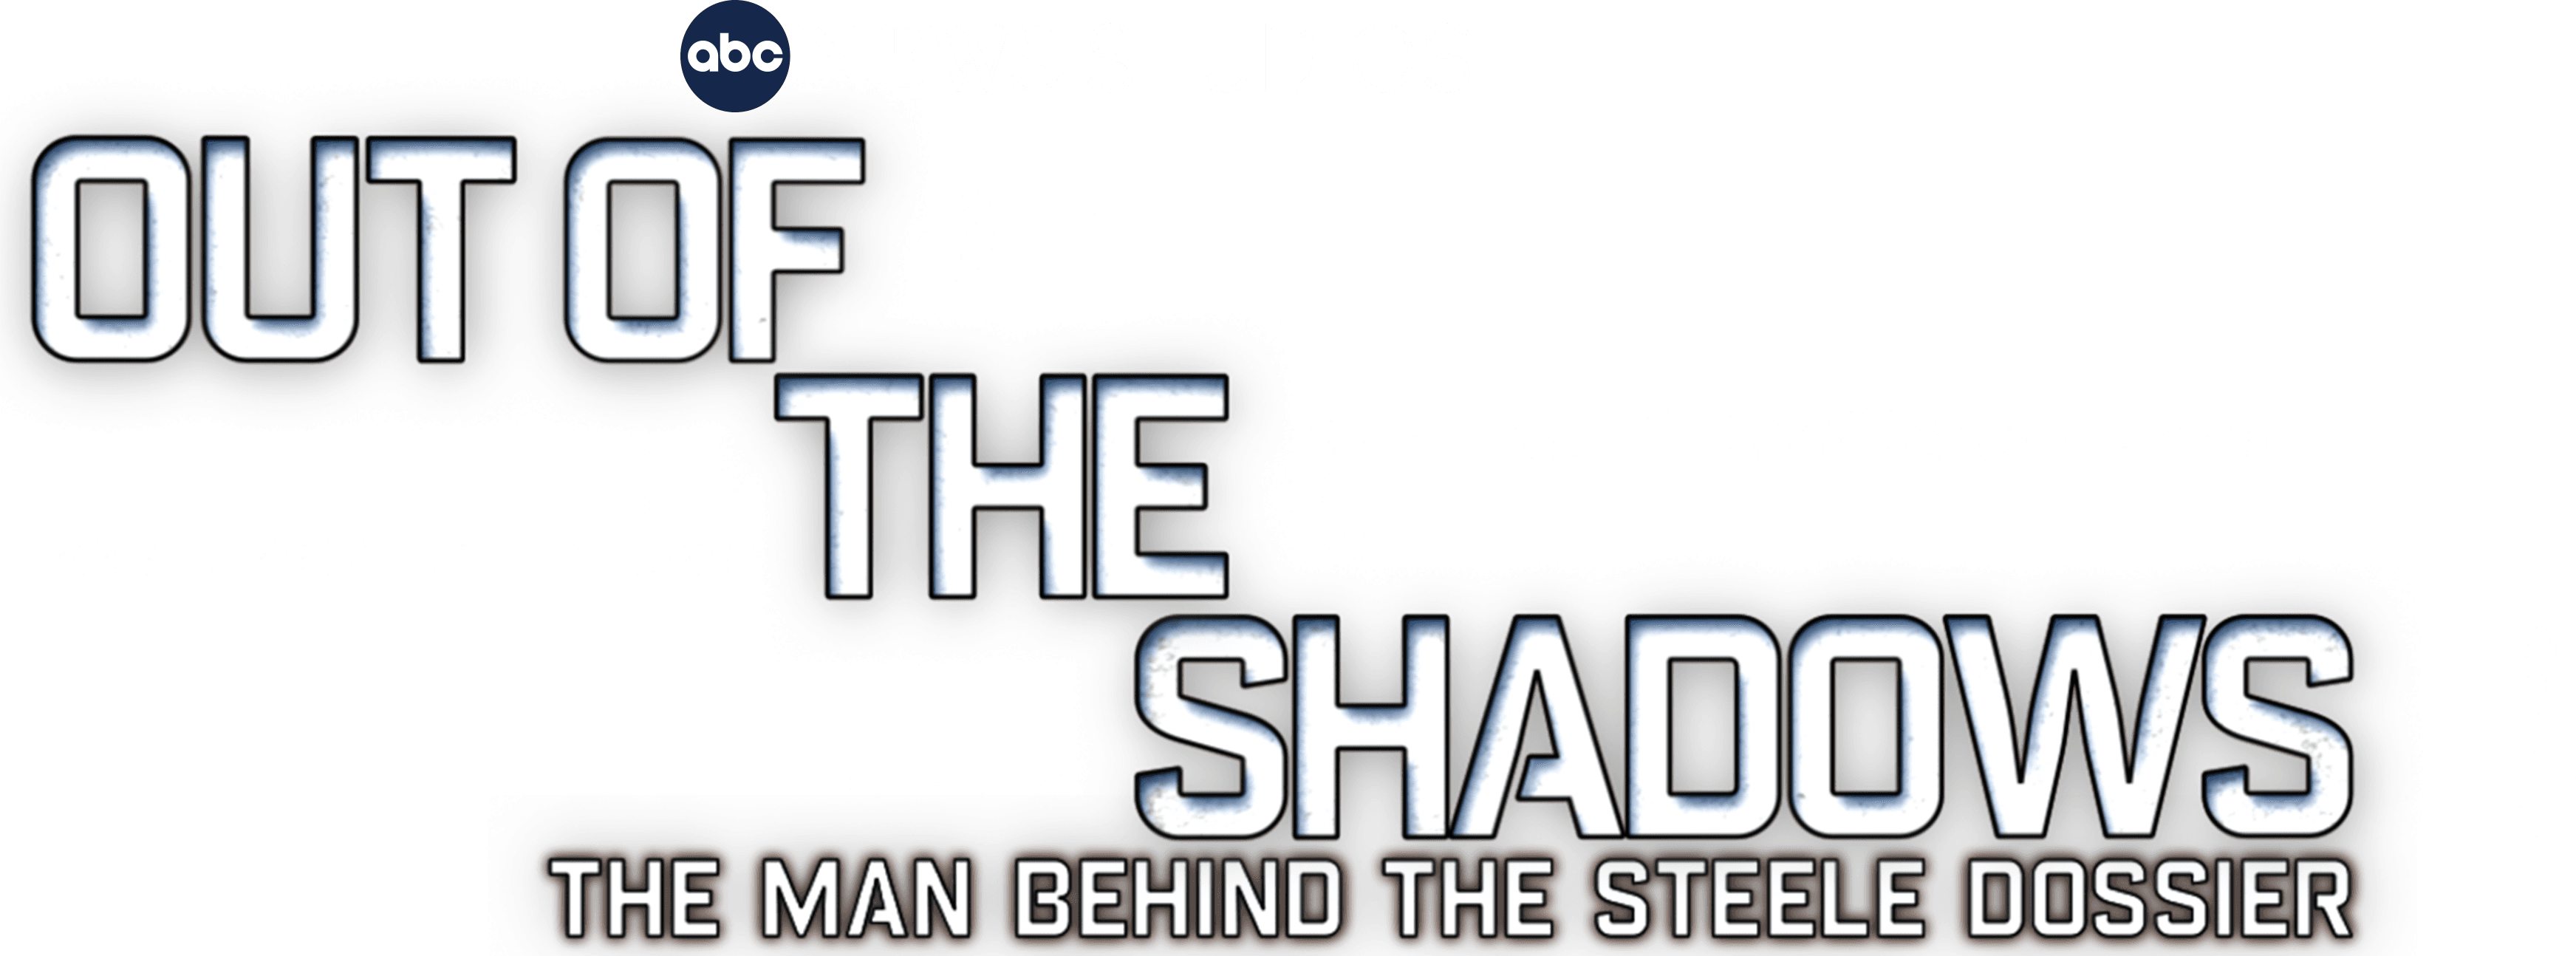 Out of the Shadows: The Man Behind the Steele Dossier logo